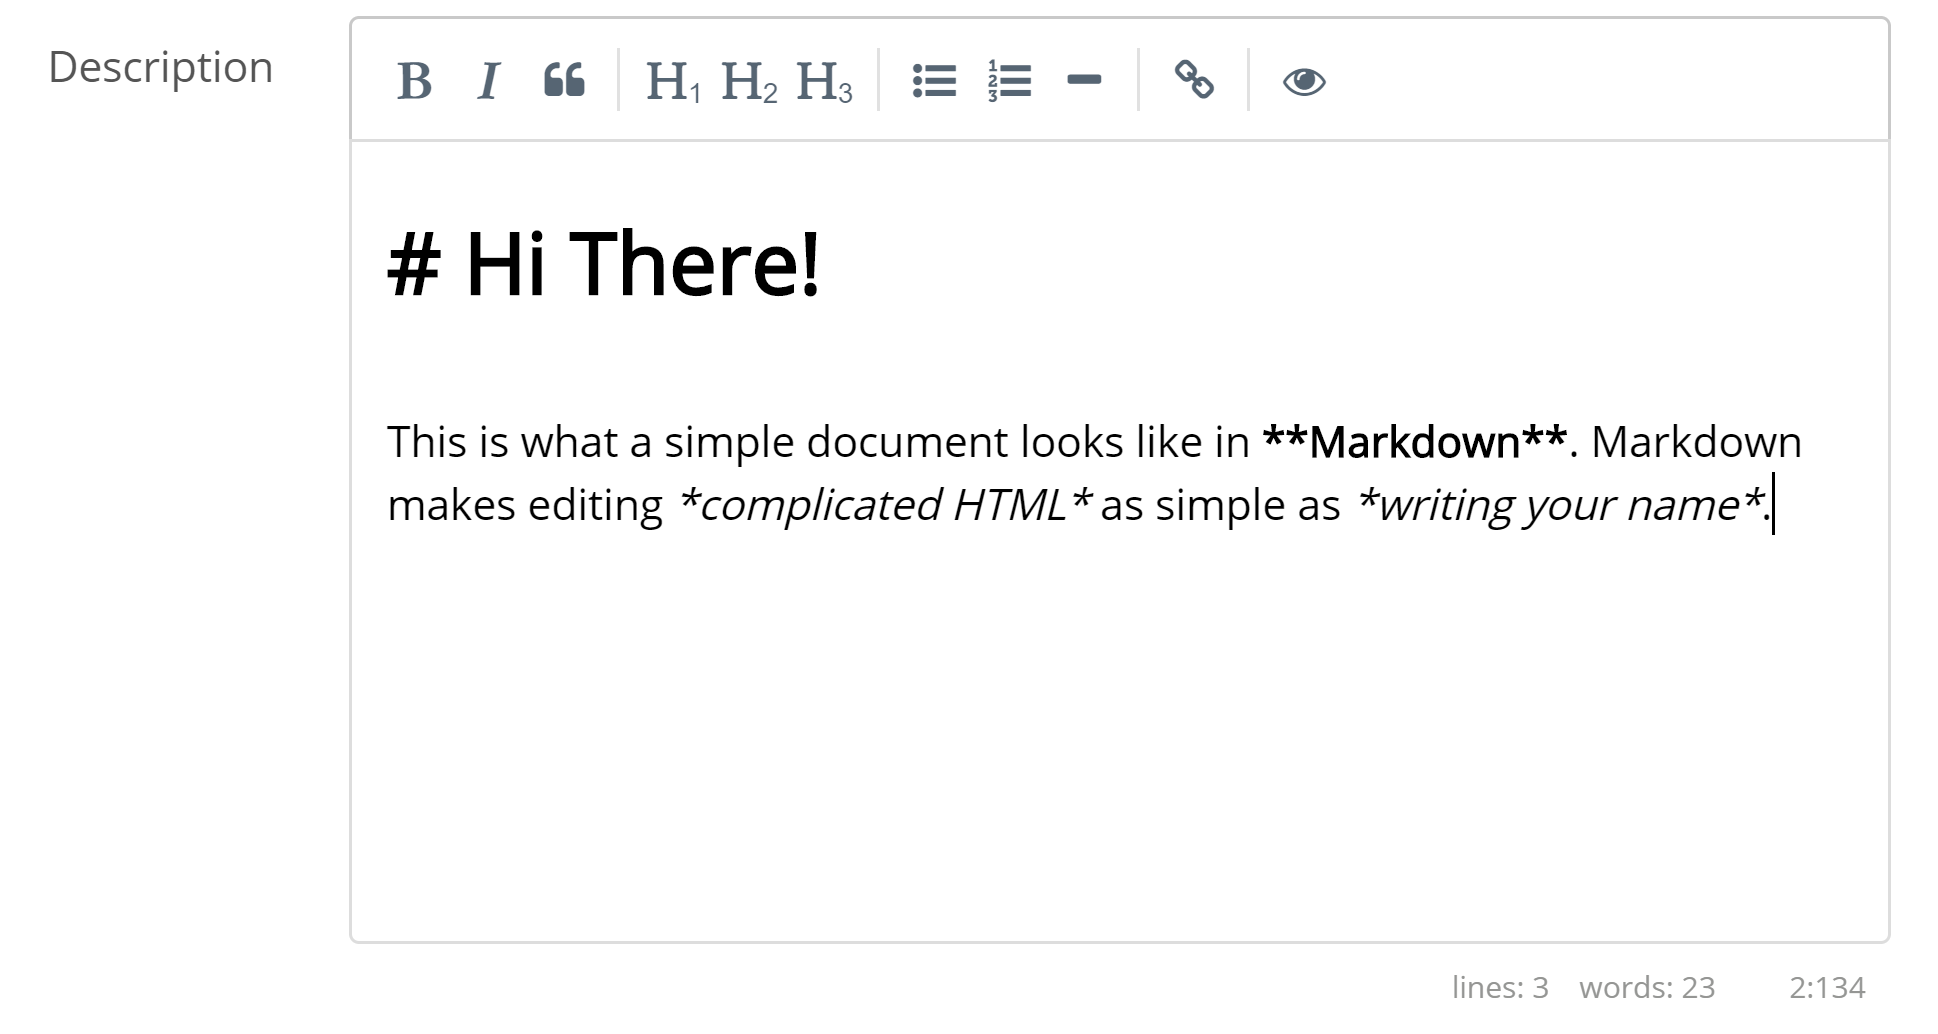 Markdown HTML Now Available We have updated the Front Desk and Booking Engine so that you can now edit room descriptions and booking engine additions in Markdown HTML! This is a significant improvement that will allow you to further personalize your booking engine to your hotel brand.